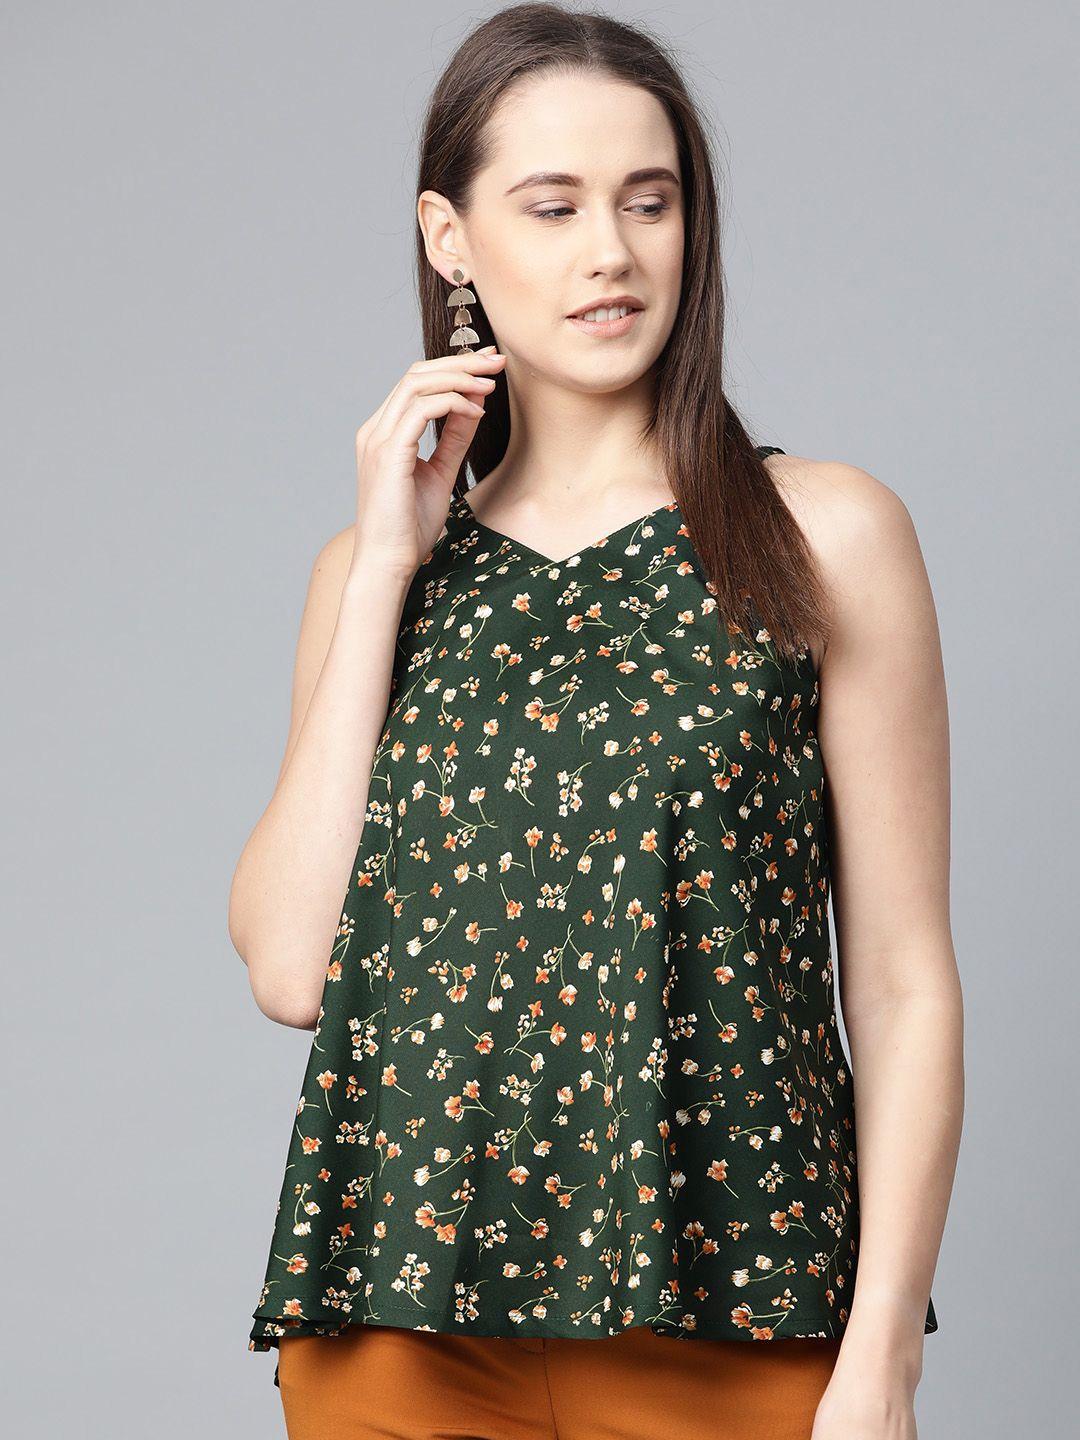 jompers women green & brown floral print a-line top